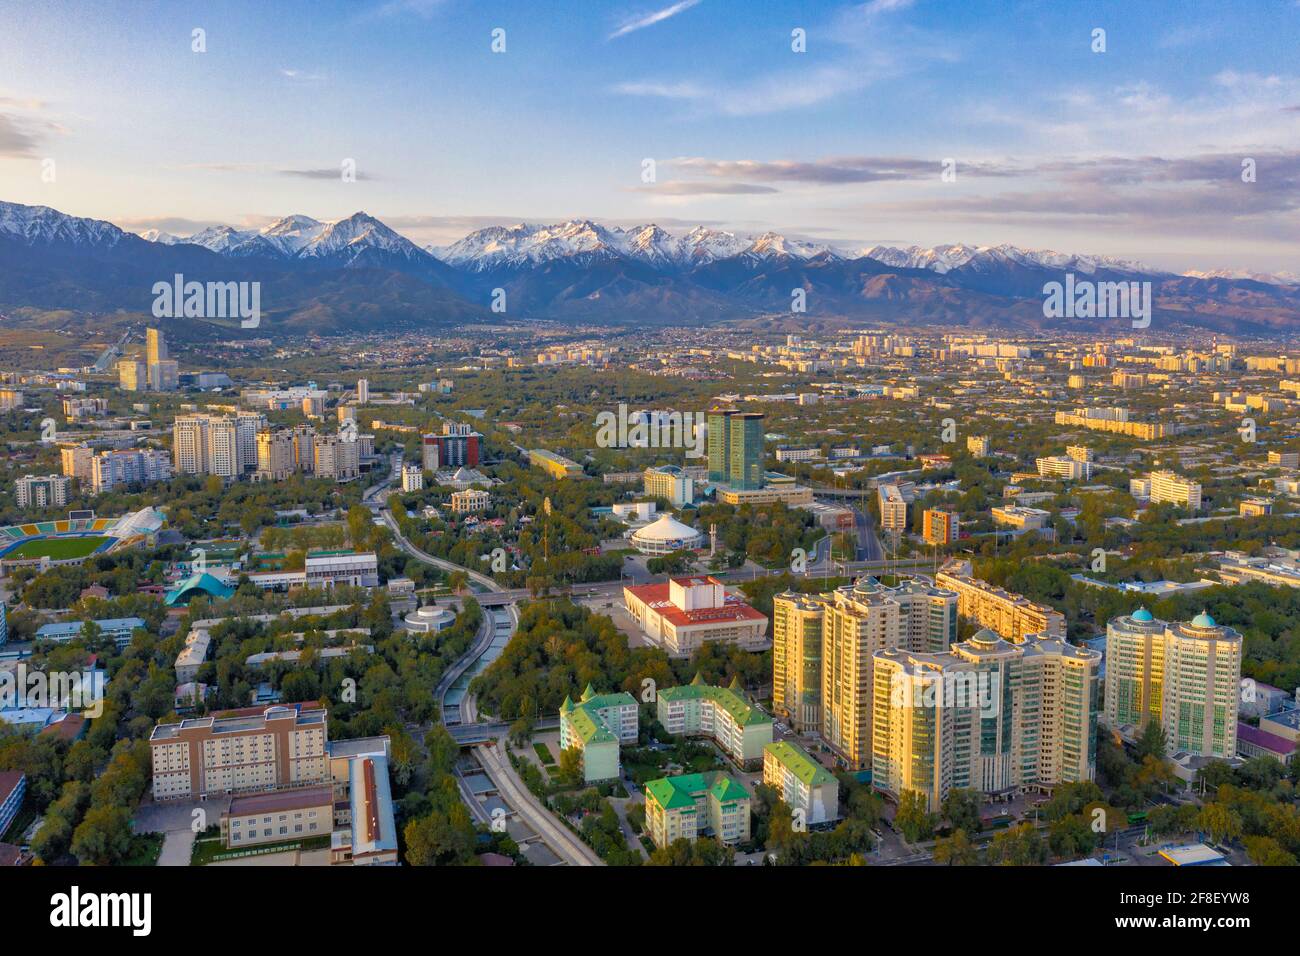 Almaty continues as the major commercial and cultural centre of Kazakhstan, as well as its most populous and most cosmopolitan city. The city is locat Stock Photo